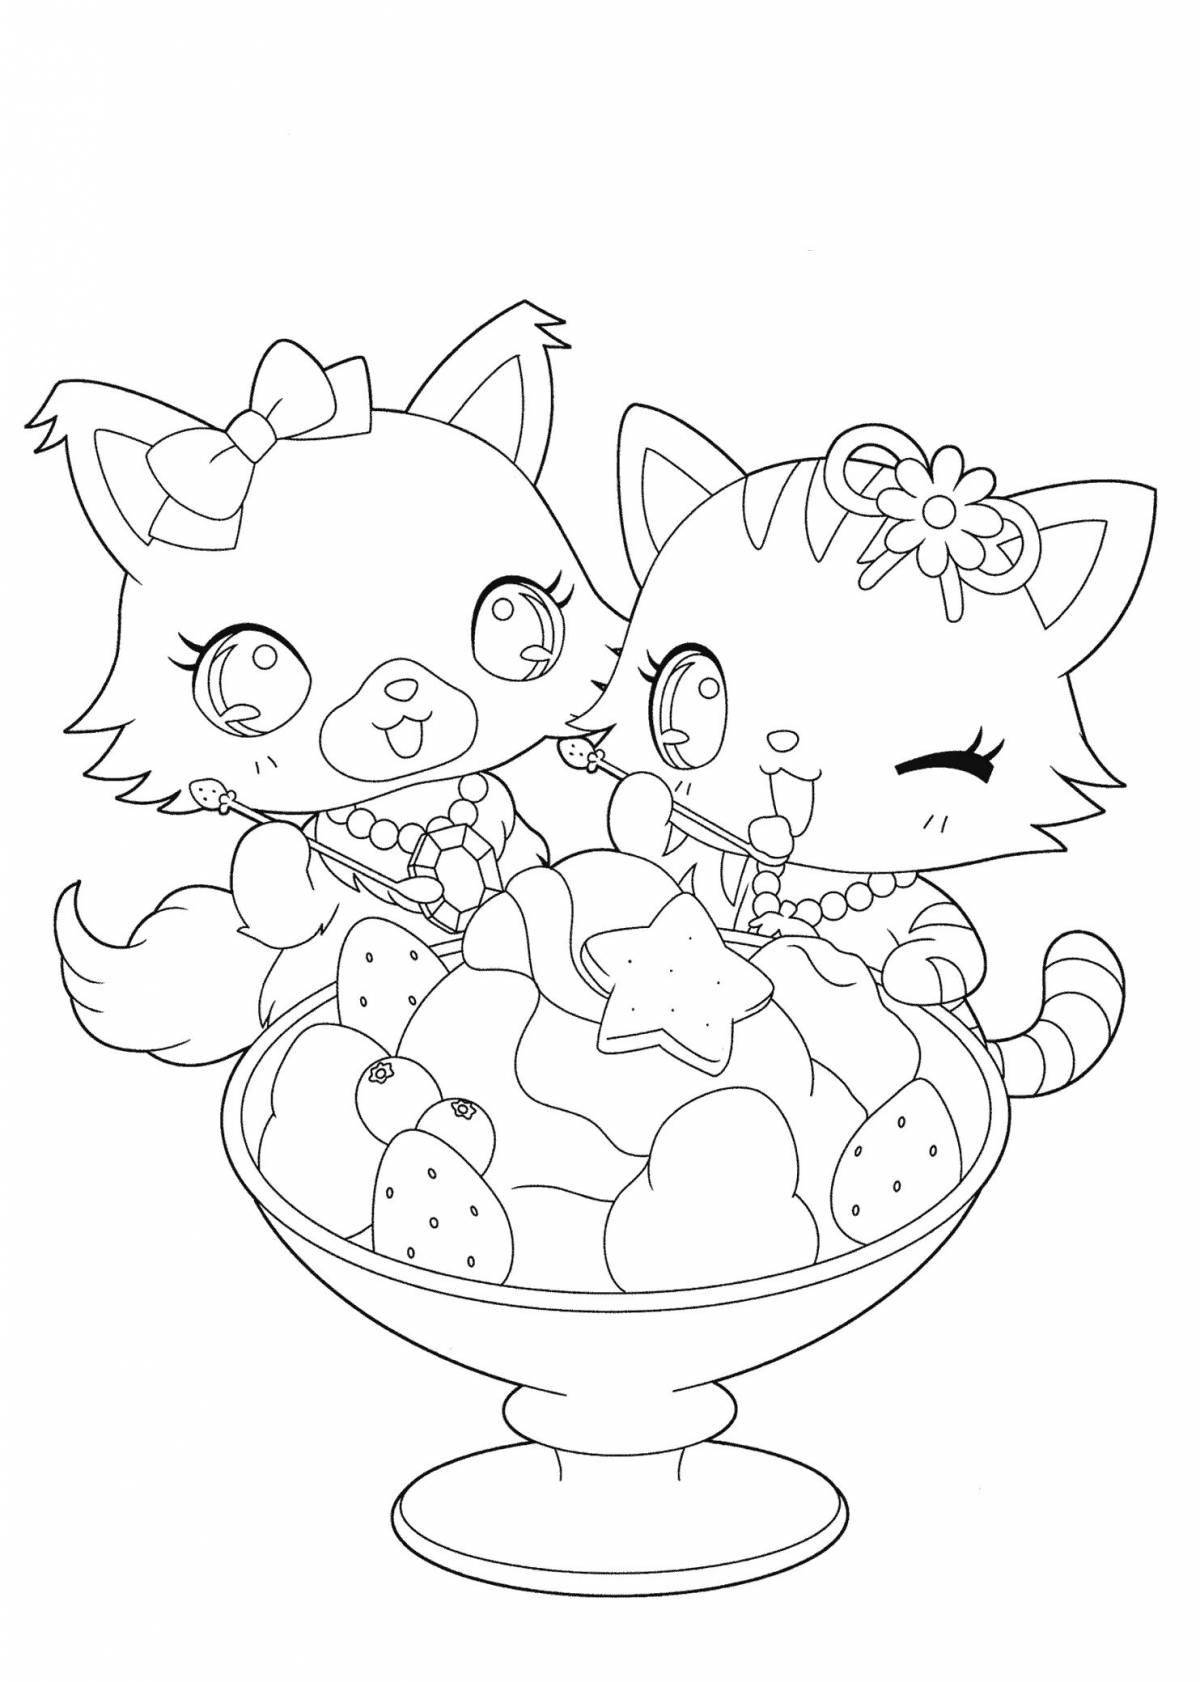 Live anime cat coloring book